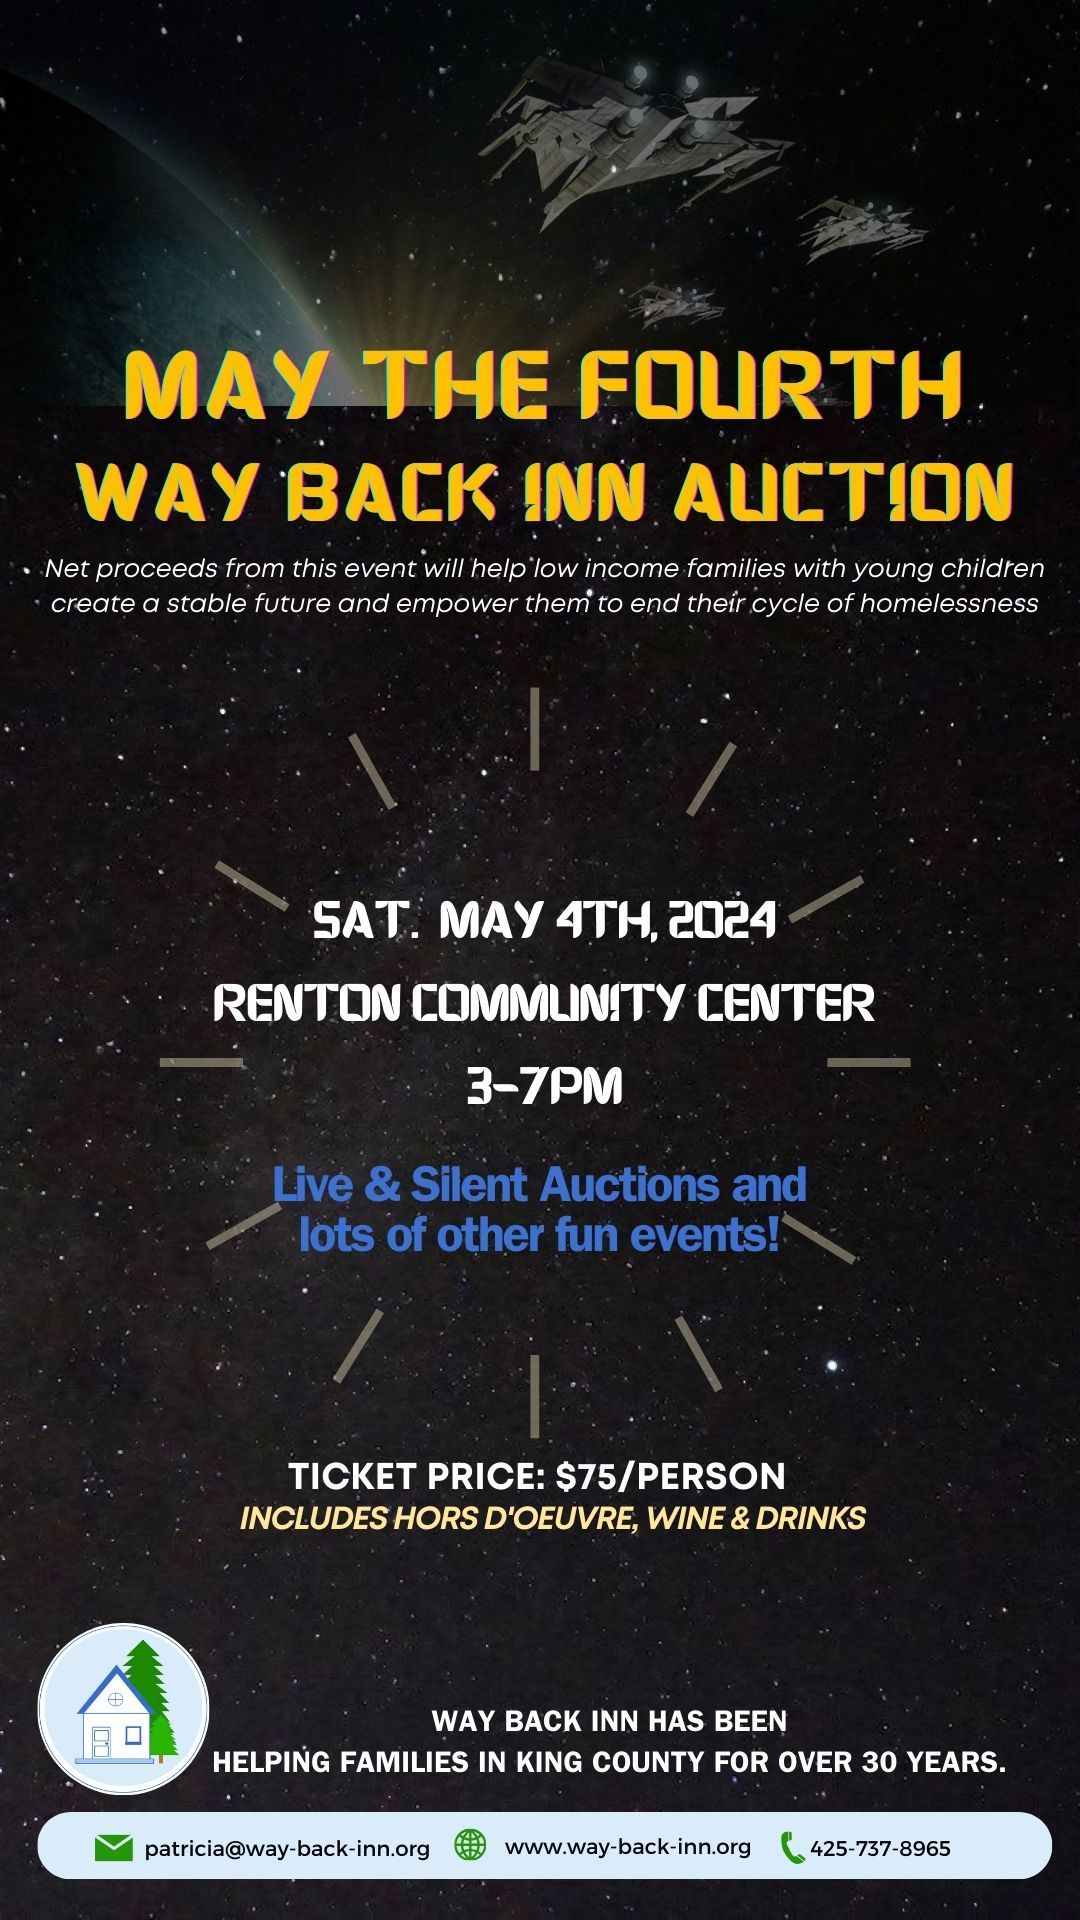 May the Fourth Way Back Inn Auction